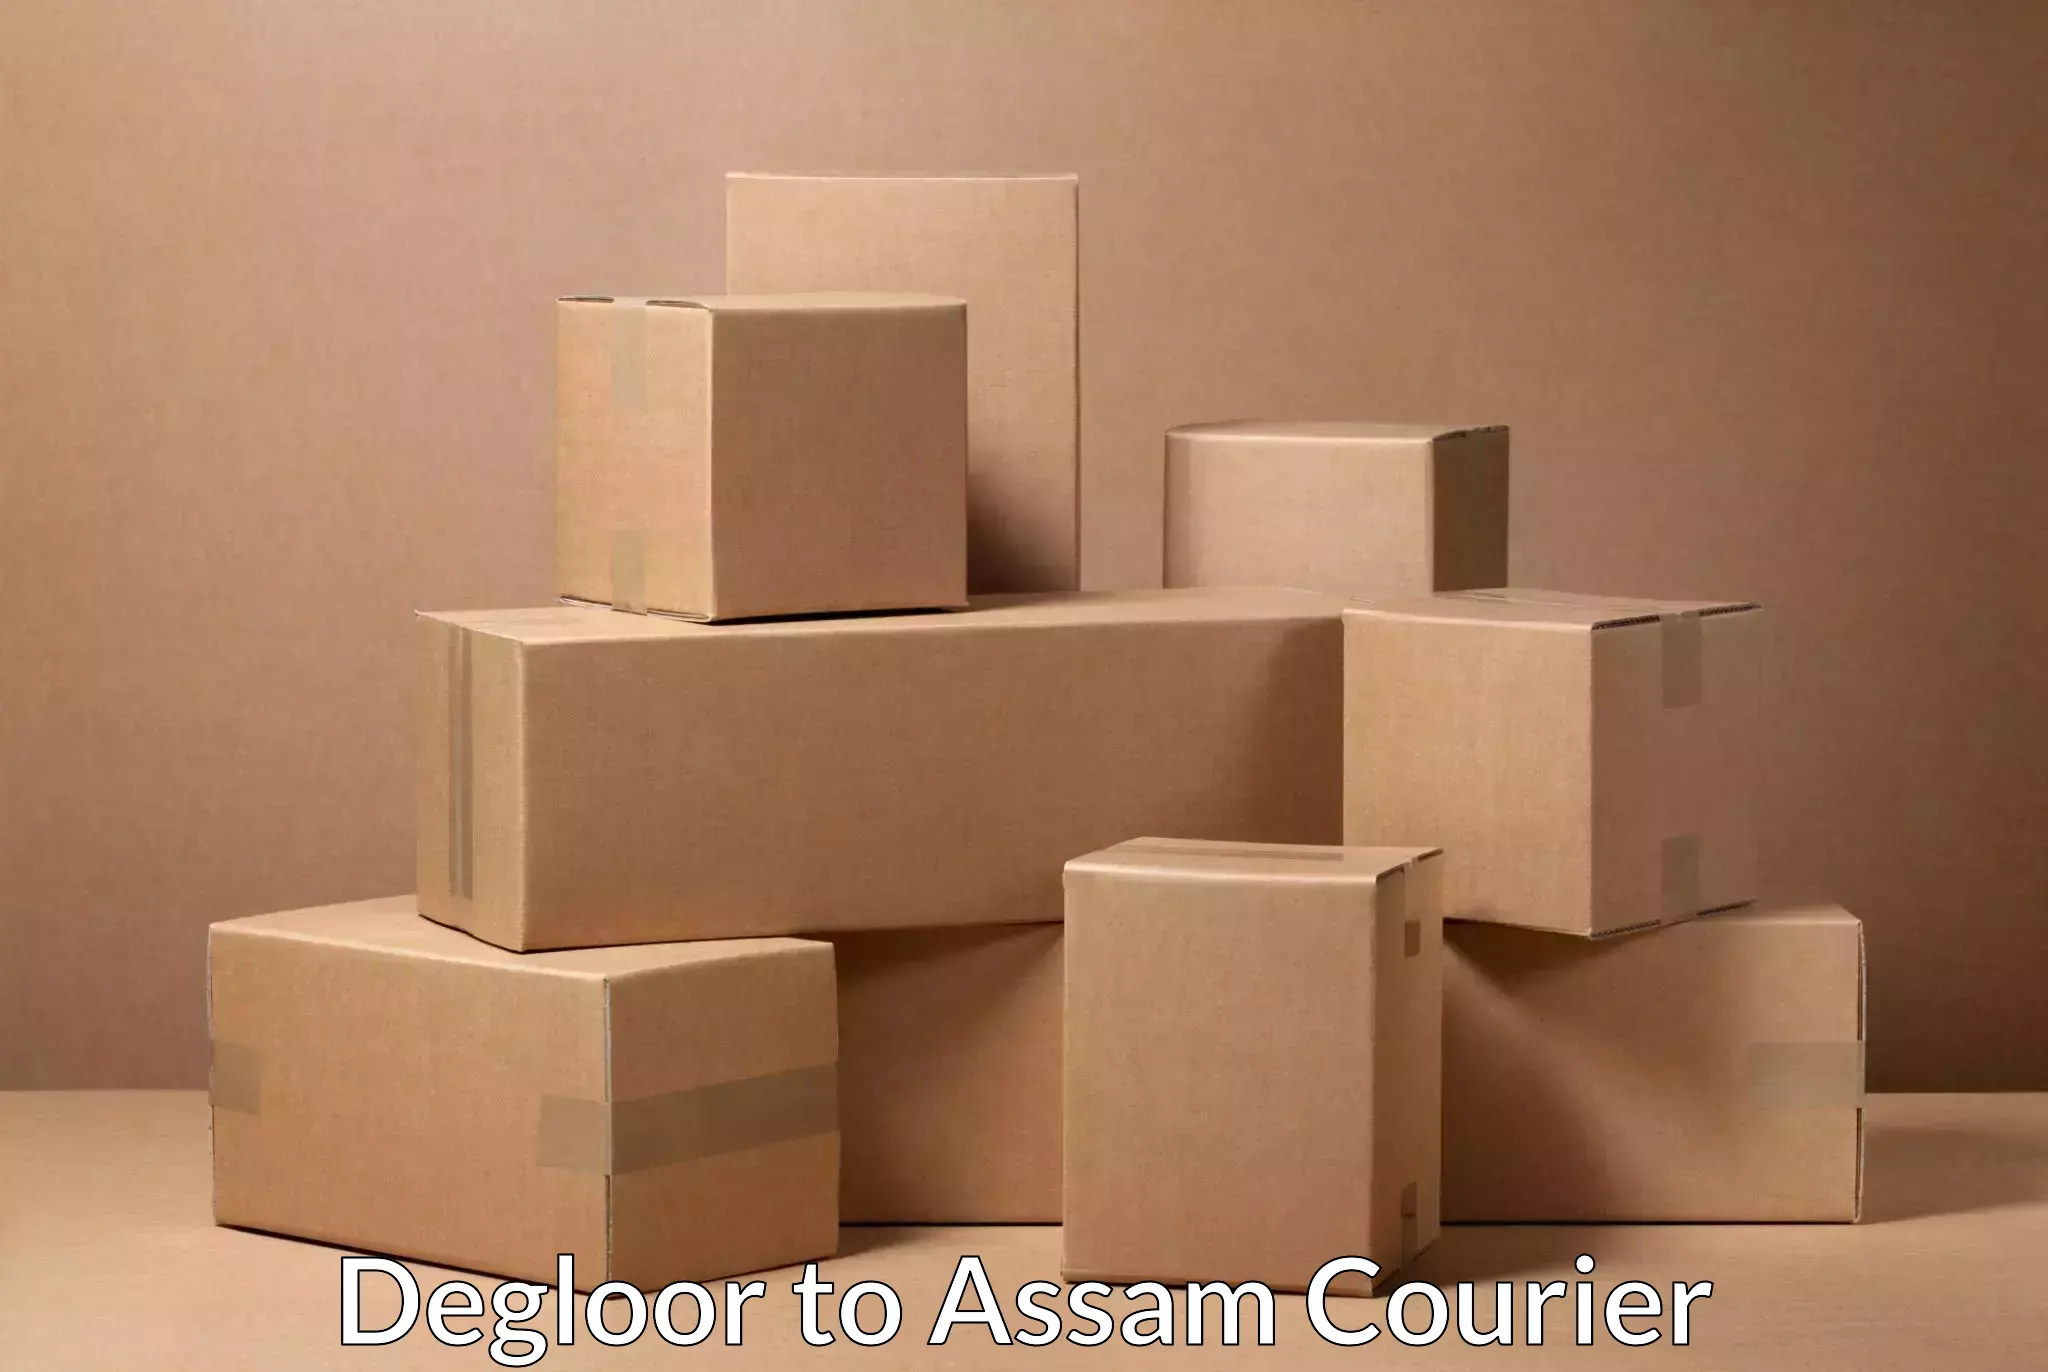 Efficient courier operations Degloor to Kabuganj